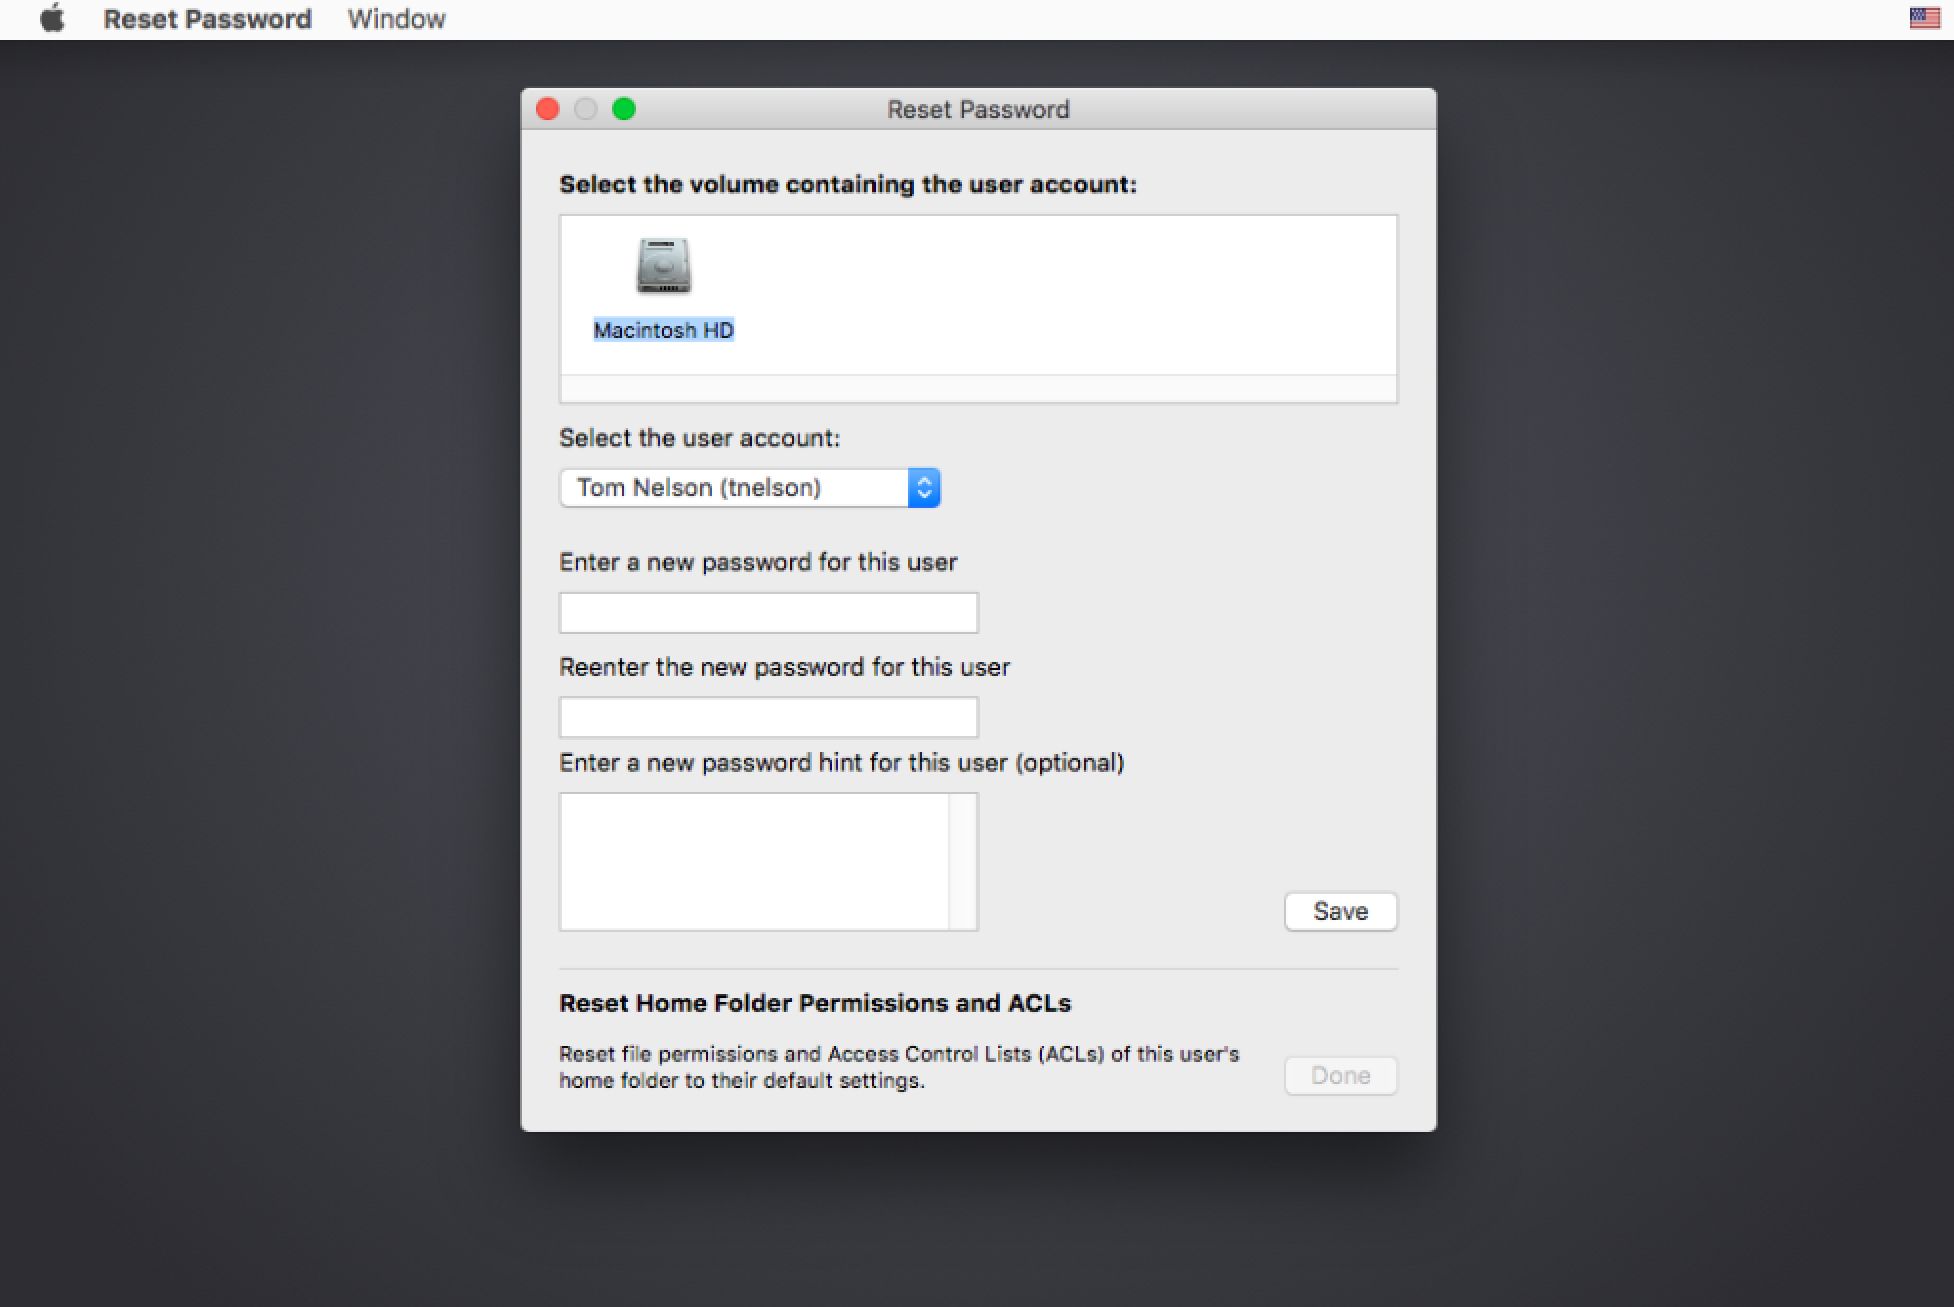 no change password option for mac disk image